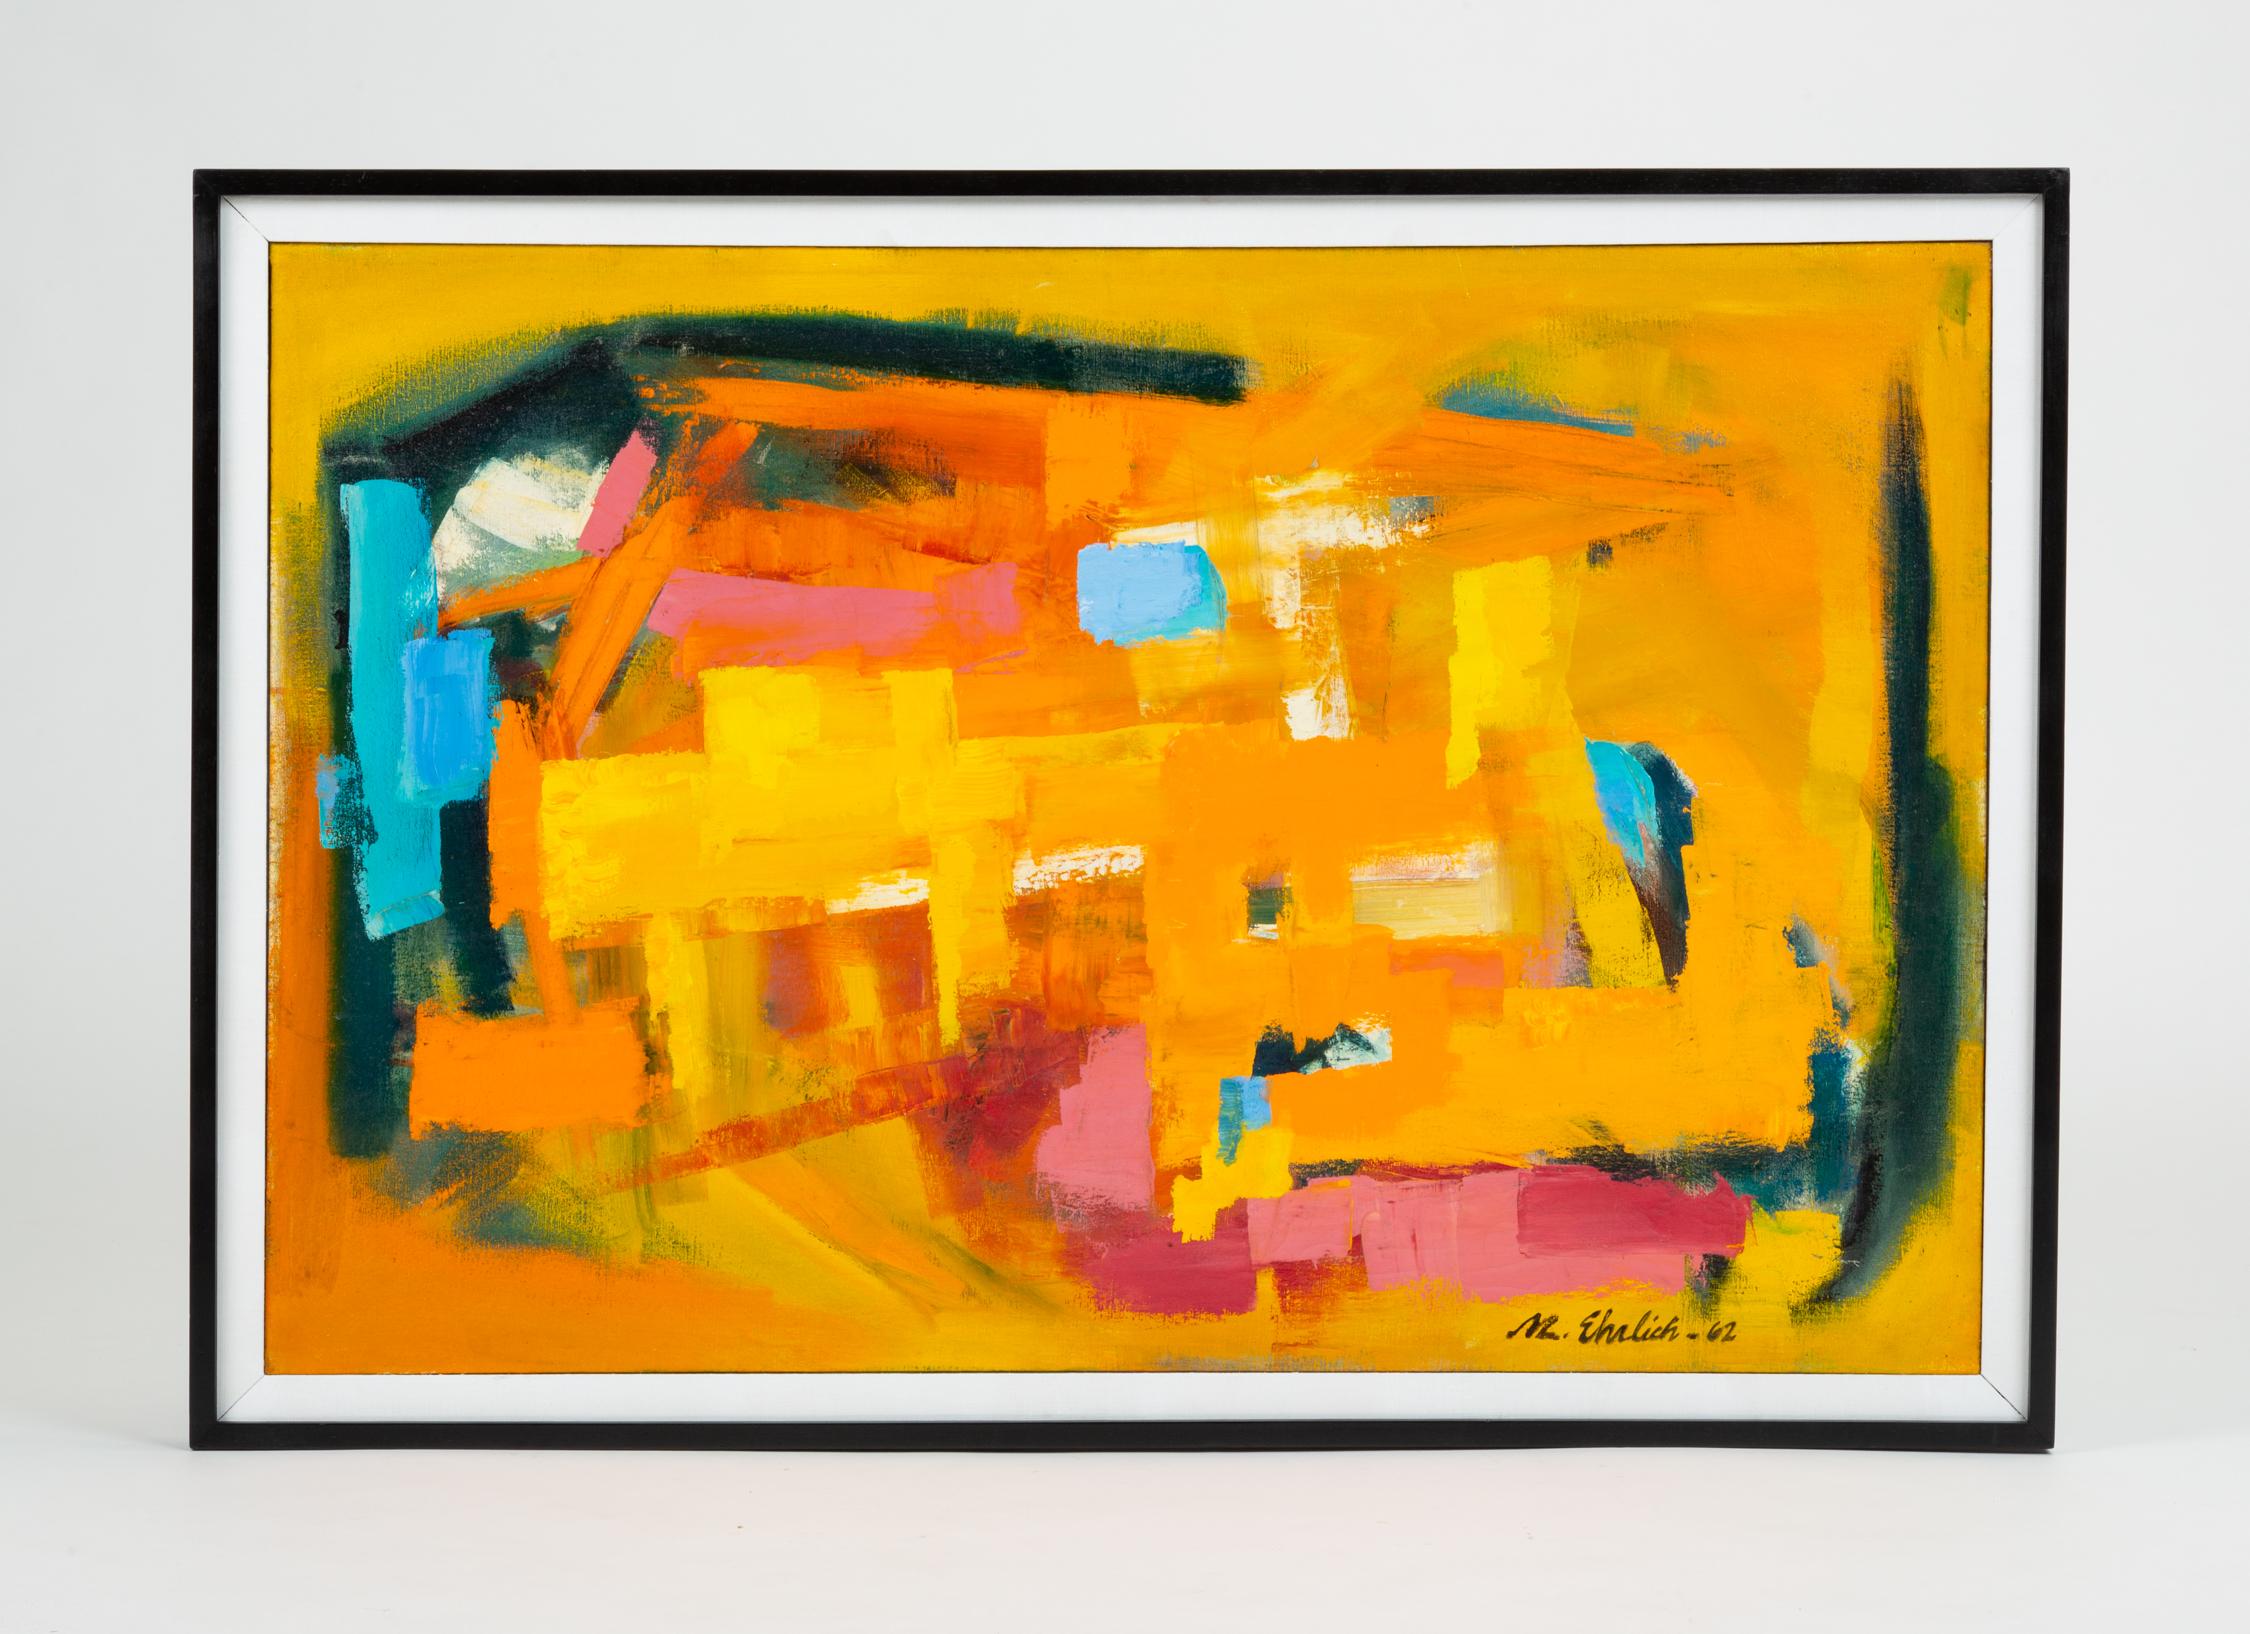 A large abstract painting attributed to Arizona-based artist Mildred “Millie” Ehrlich. Known primarily for her collage and mixed media work in the late 20th century, Ehrlich studied painting at the Art Institute of Chicago and moved through